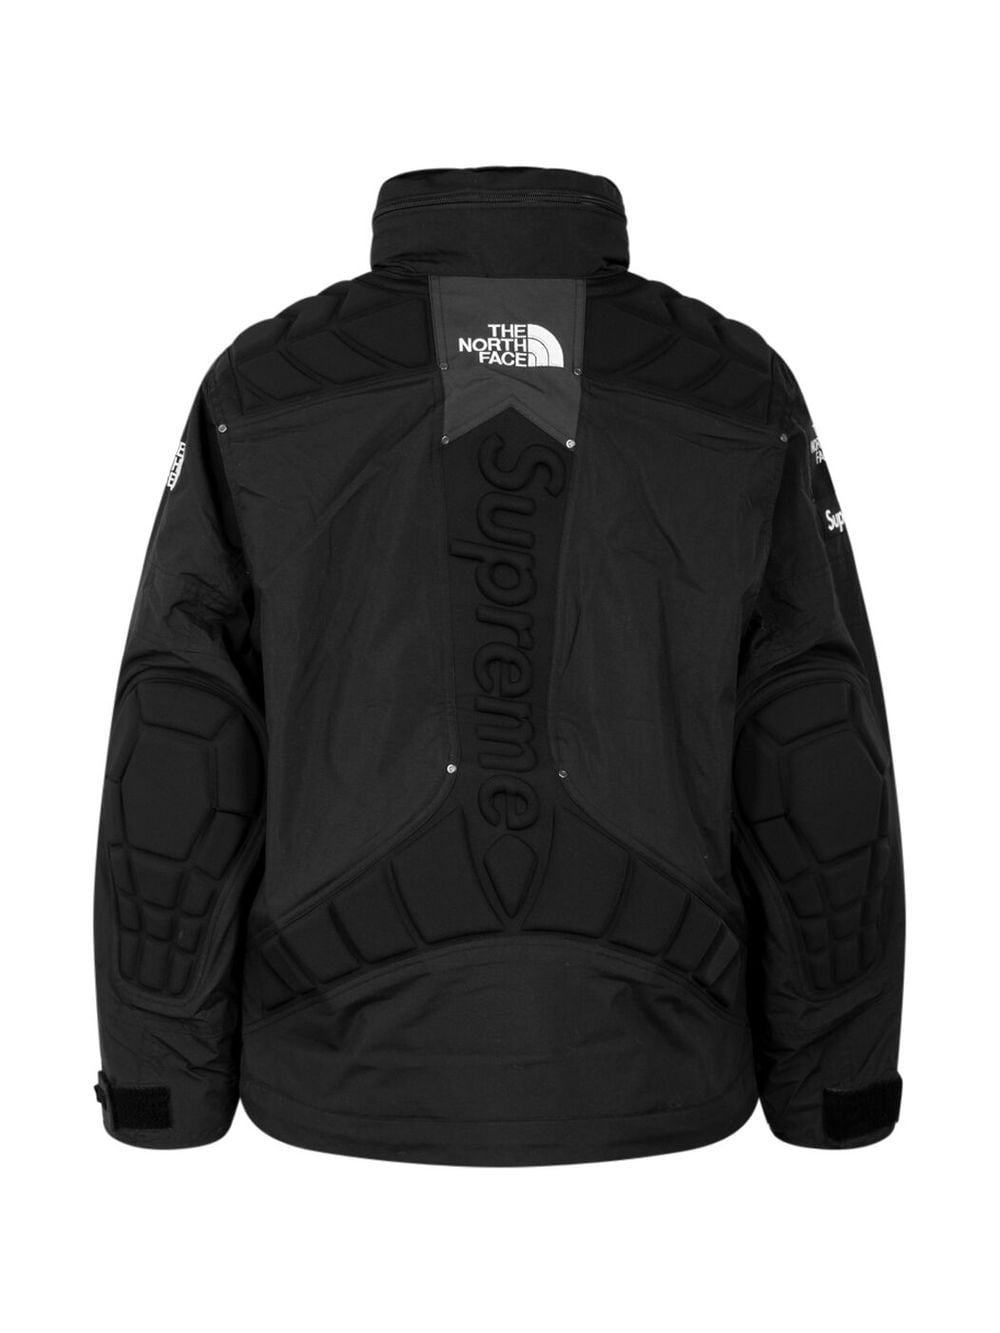 Supreme x The North Face Steep Tech Apogee jacket | REVERSIBLE